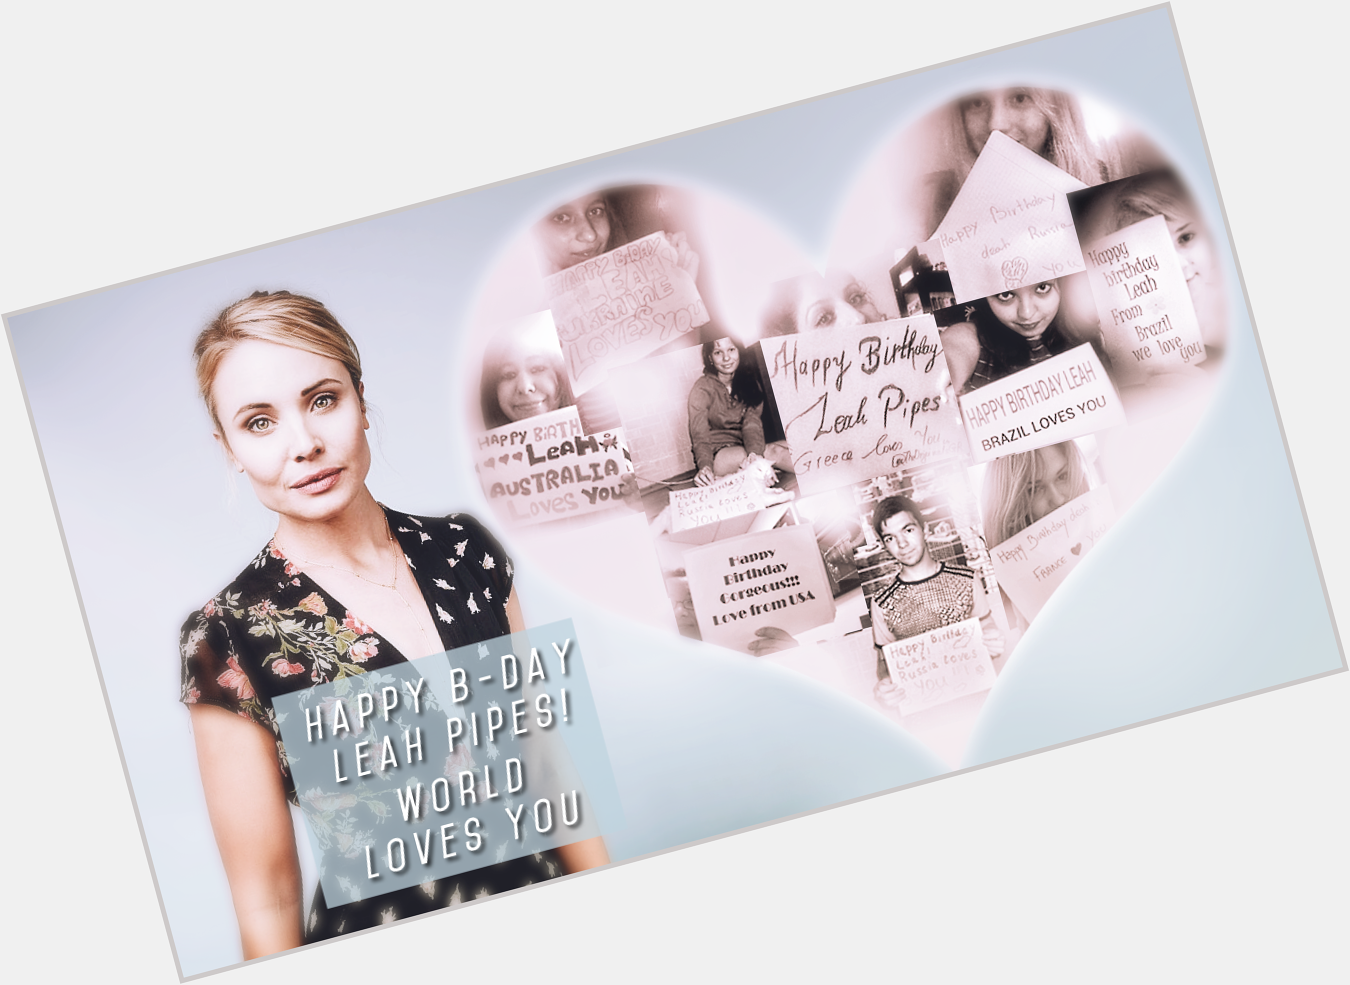  be yourself and change world around you. Thanks for everything, love you x  Happy Birthday Leah Pipes 